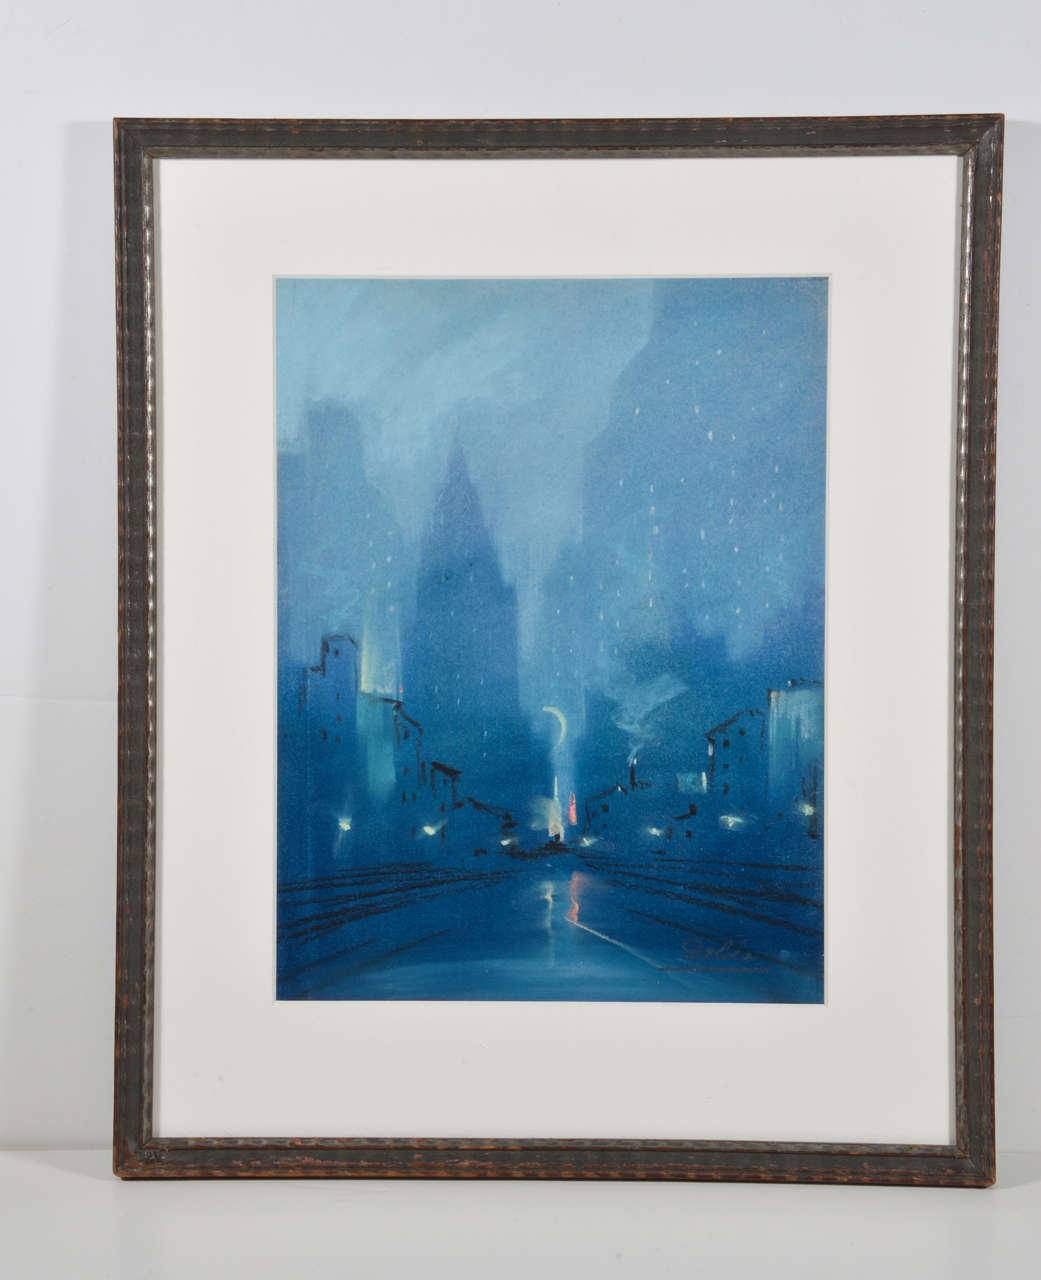 Beautiful Dolice evening Manhattan street scene.  Deep blues and black, with vibrant highlights.
Excellent condition, with vintage frame (possibly original) and archival mat/museum glass.
Well listed artist, with significant Museum